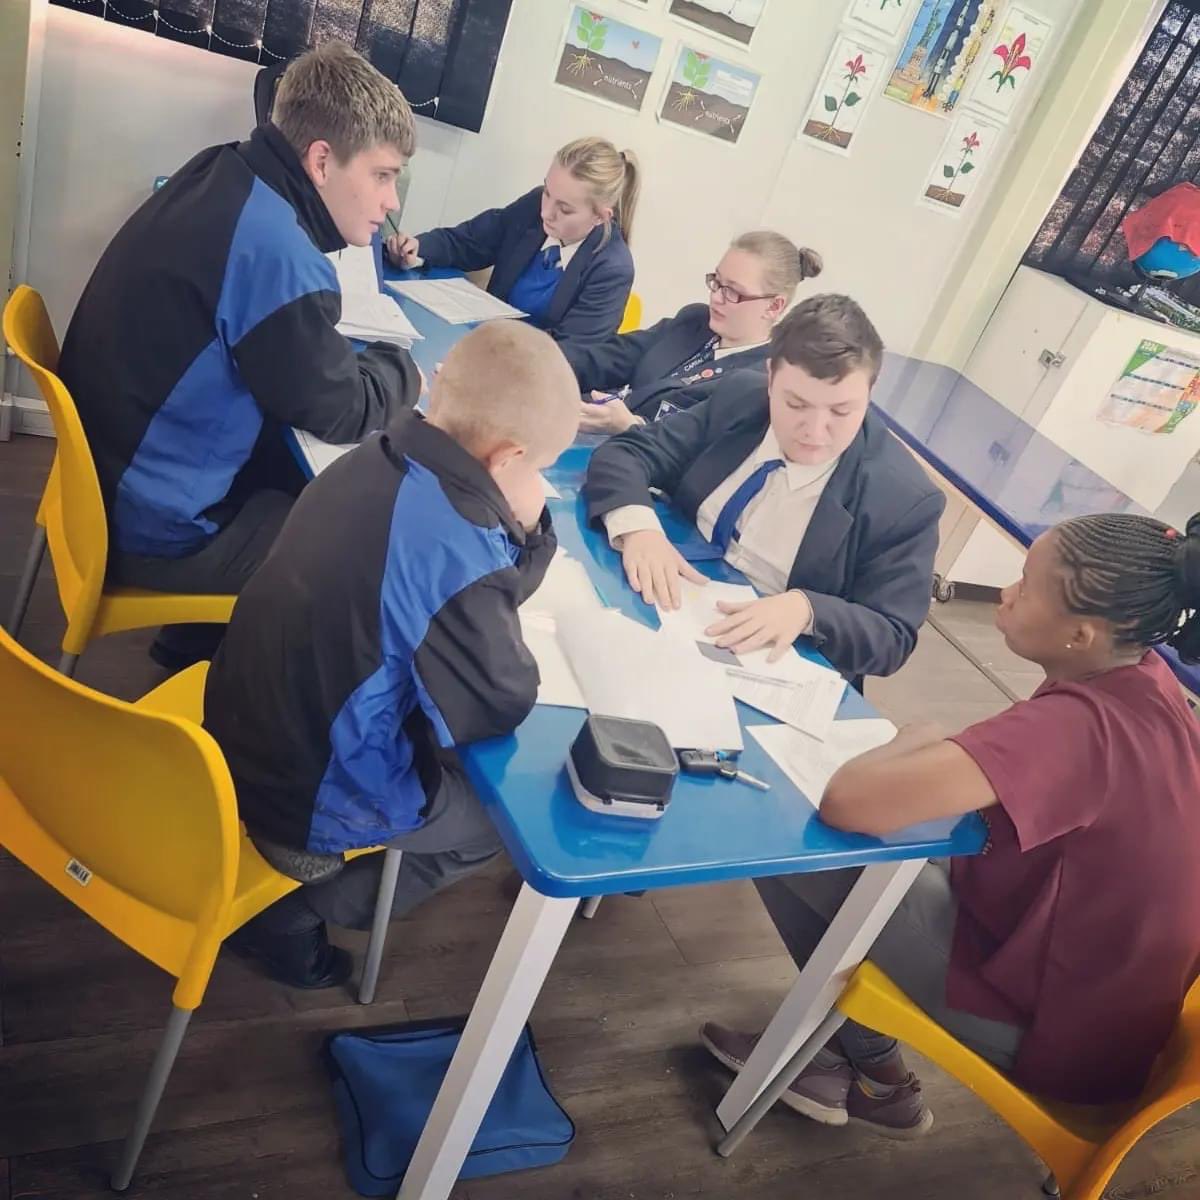 Take a look! Another District Expo took place yesterday at Curro Bloemfontein, focusing primarily on private schools in the Bloemfontein area. Stay tuned for updates... Link in bio for upcoming District Expos across South Africa 🇿🇦 #DiscoverEskomExpo #cutfuturestudents #CUT